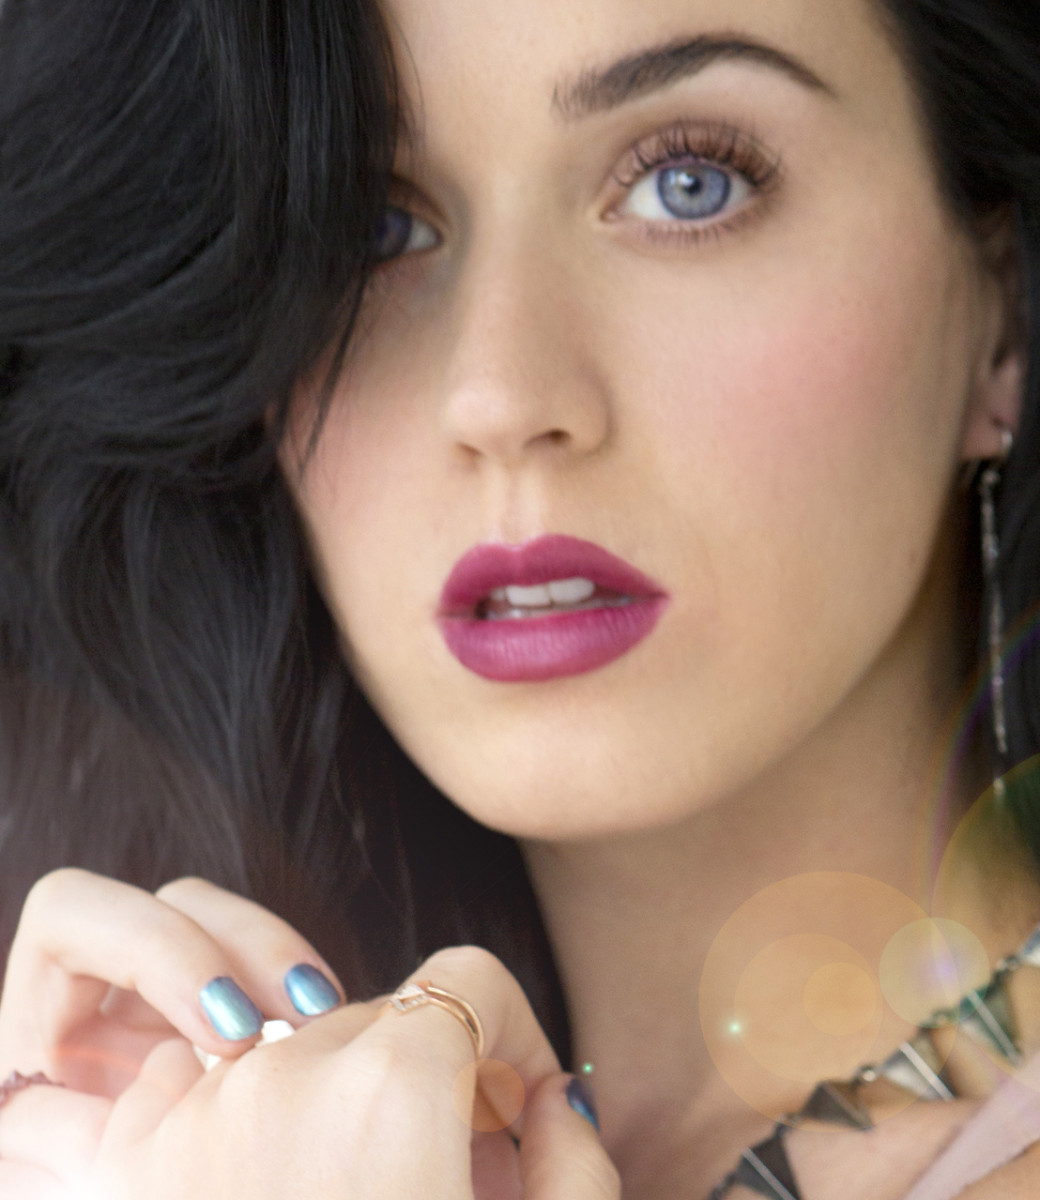 Katy Perry Covergirl makeup